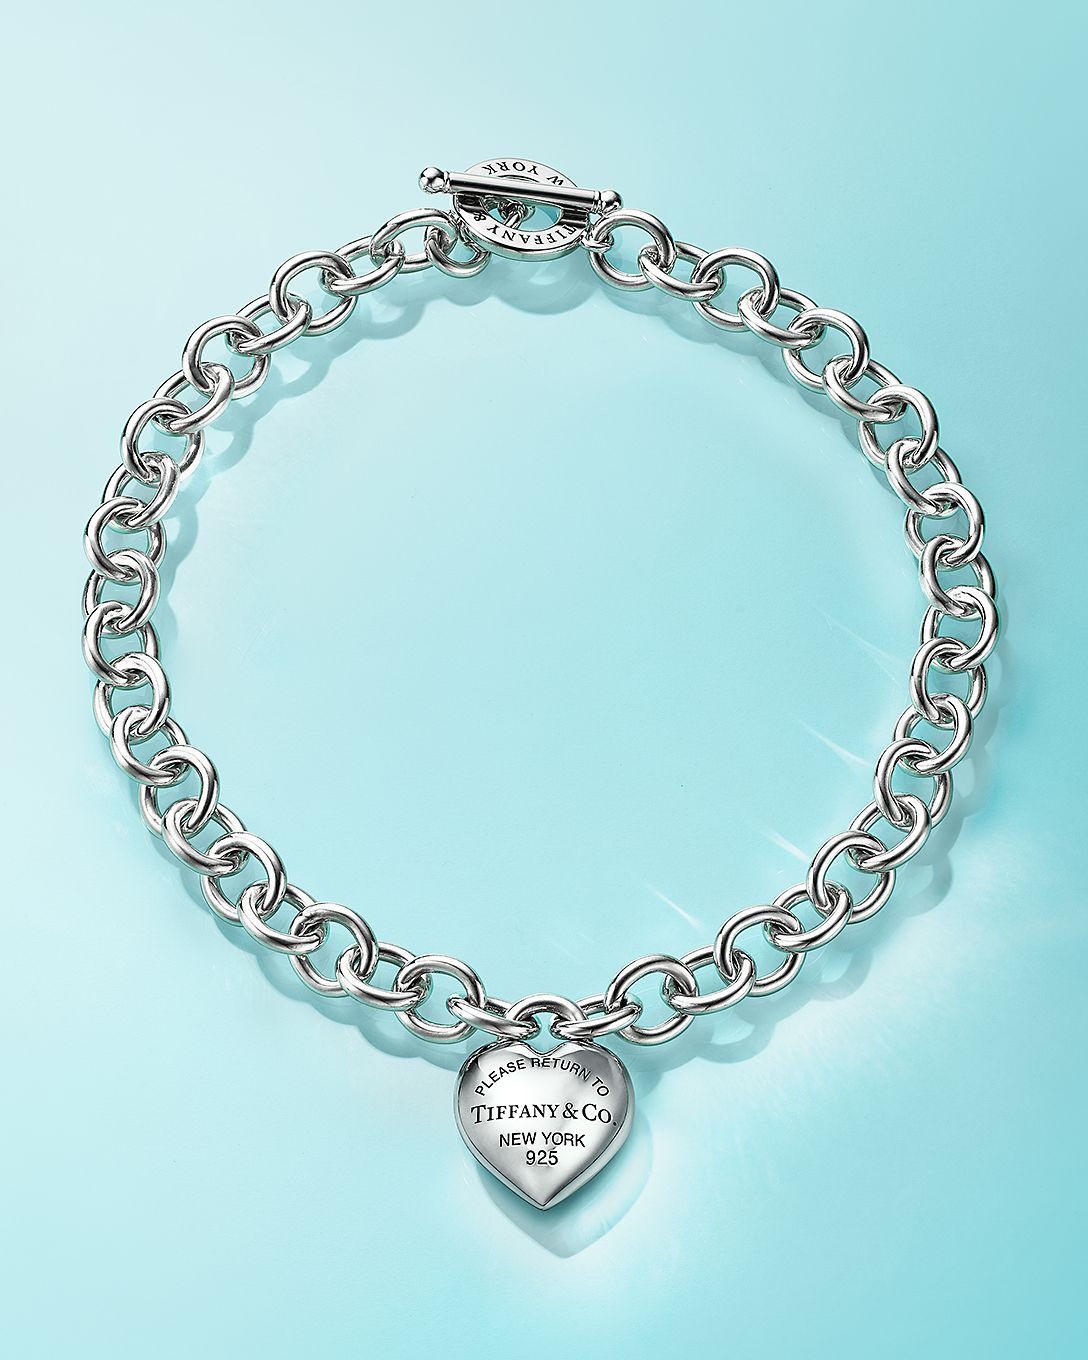 Tiffany & Co. Official | Luxury Jewelry, Gifts & Accessories Since